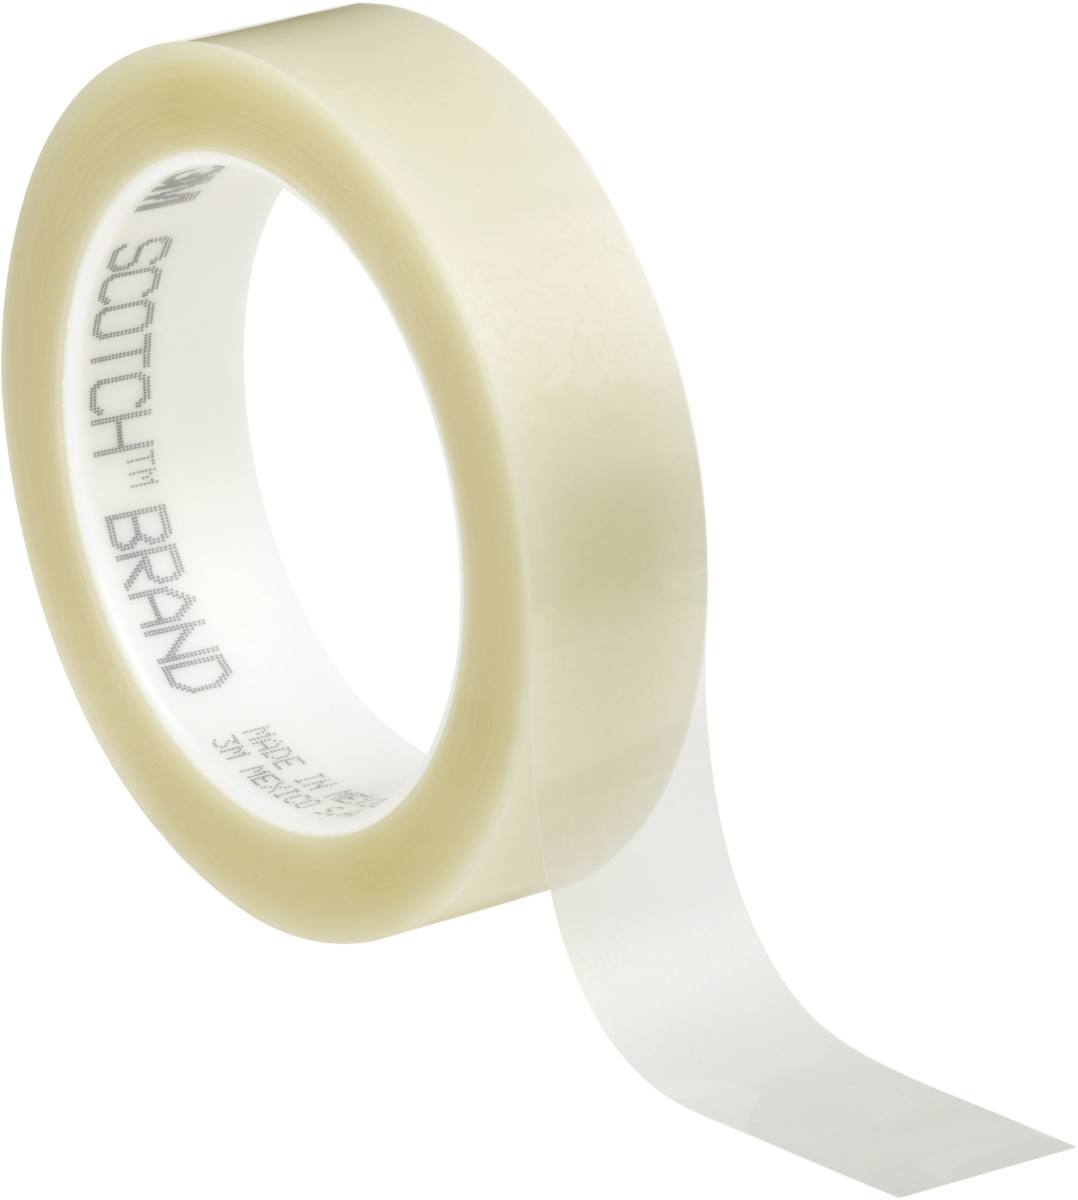 3M Polyester adhesive tape 850 T, transparent, 38 mm x 66 m, 0.05 mm